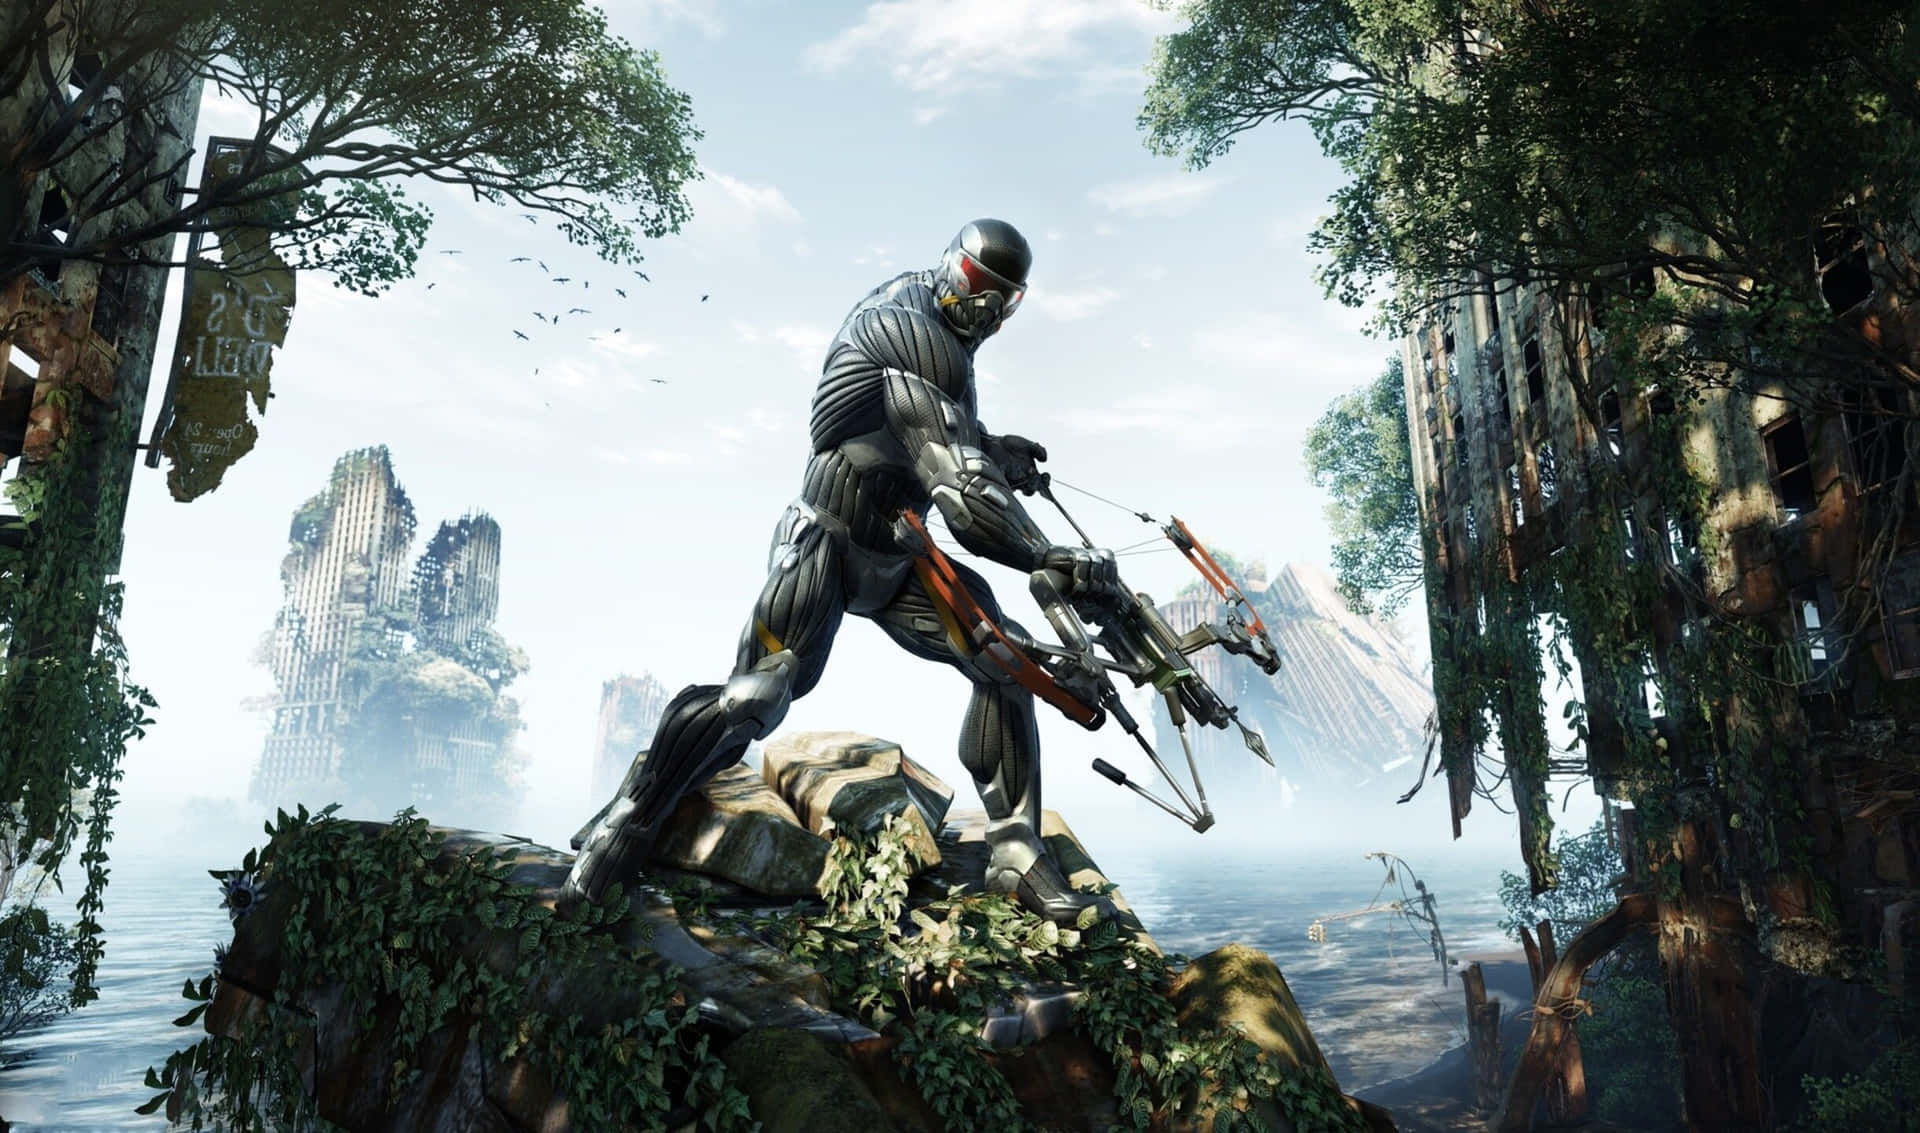 "Take On Any Challenge In Crysis 3"